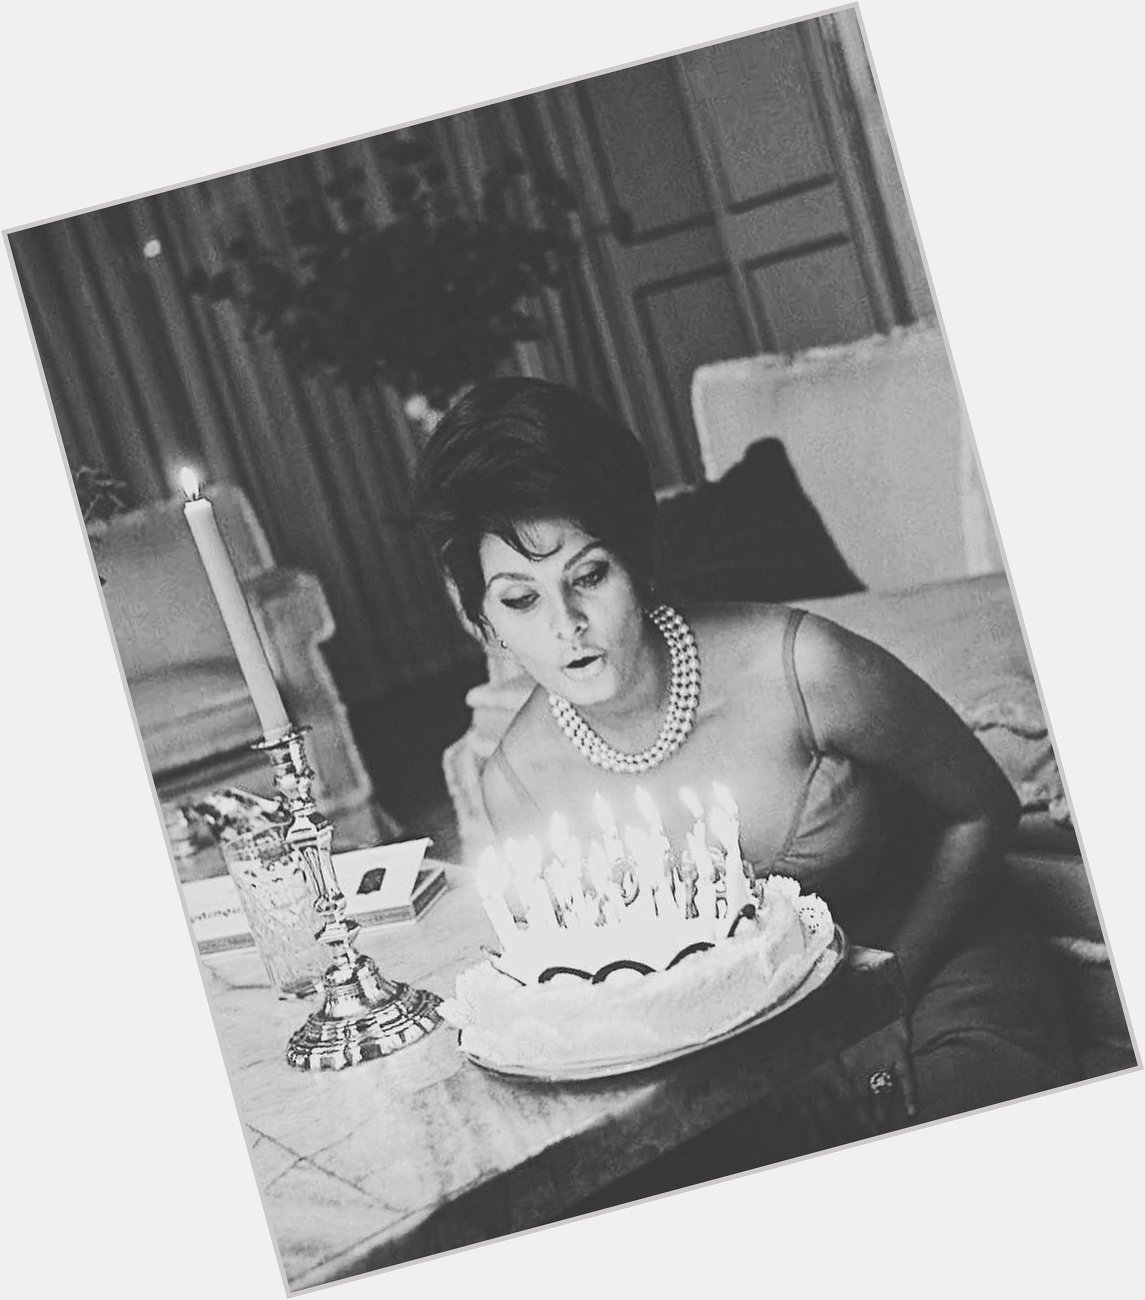 Happy birthday to one of the most beautiful woman ever existed Sophia Loren
88  